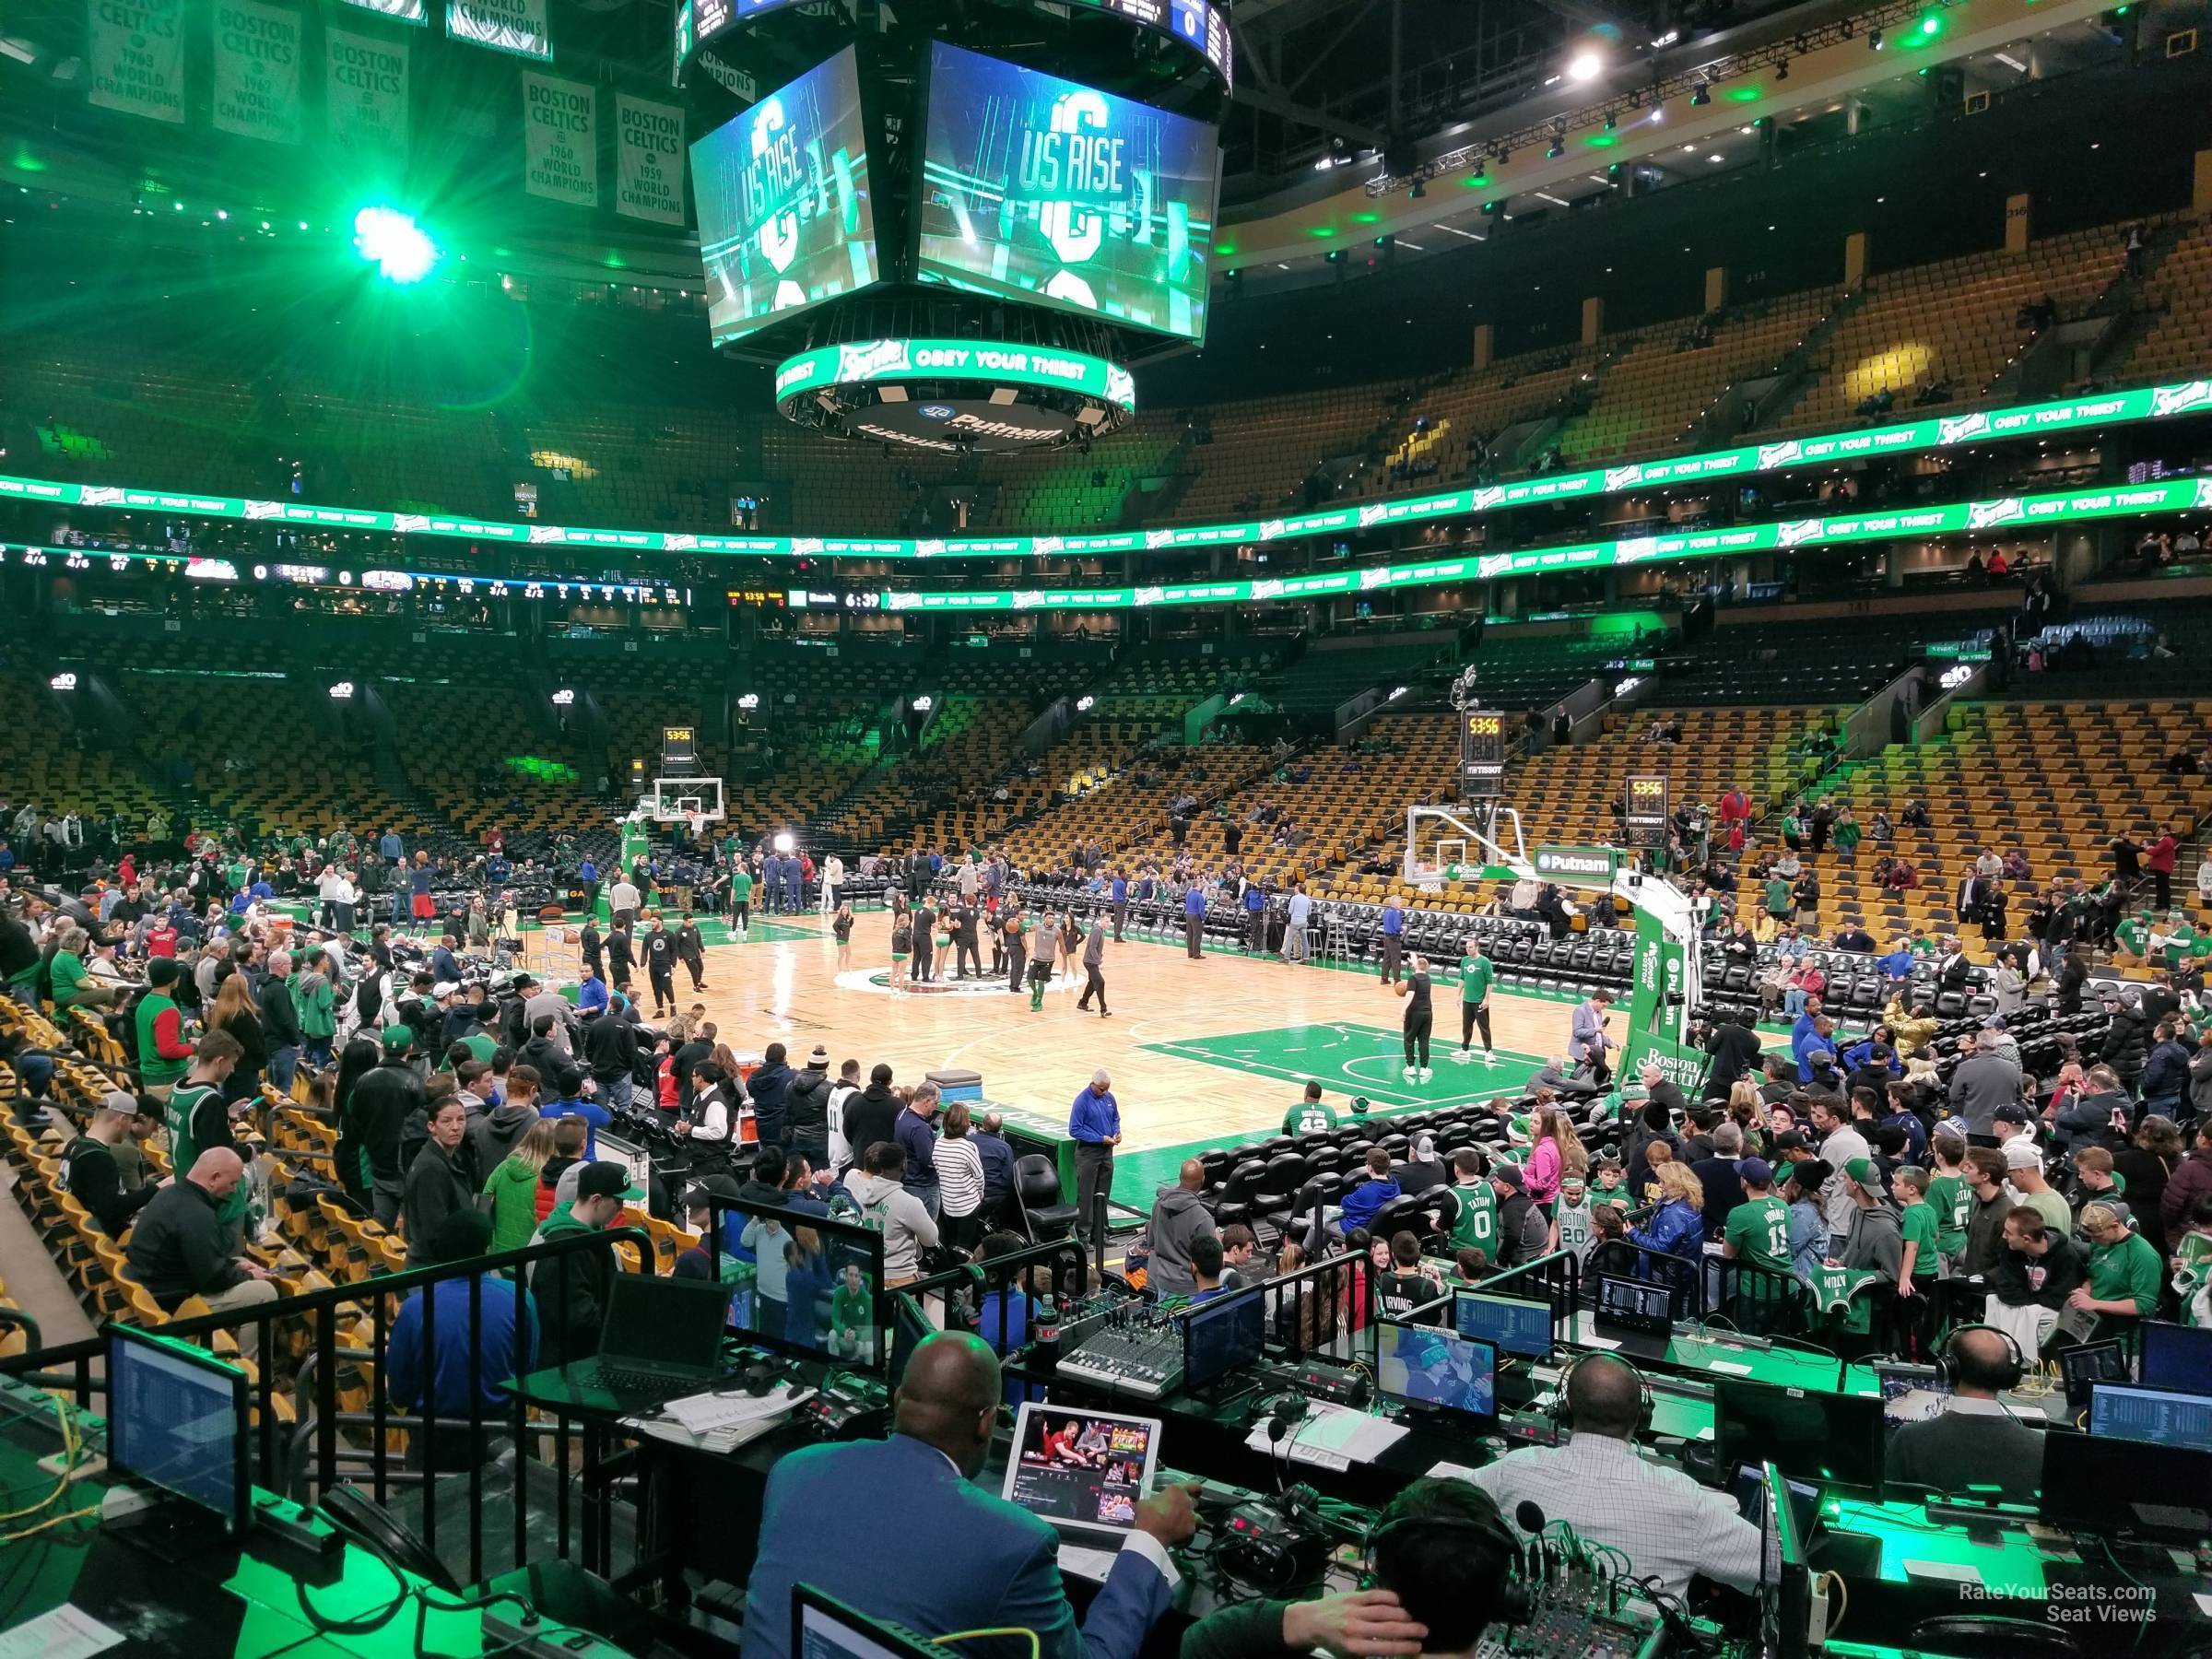 loge 20, row 11 seat view  for basketball - td garden